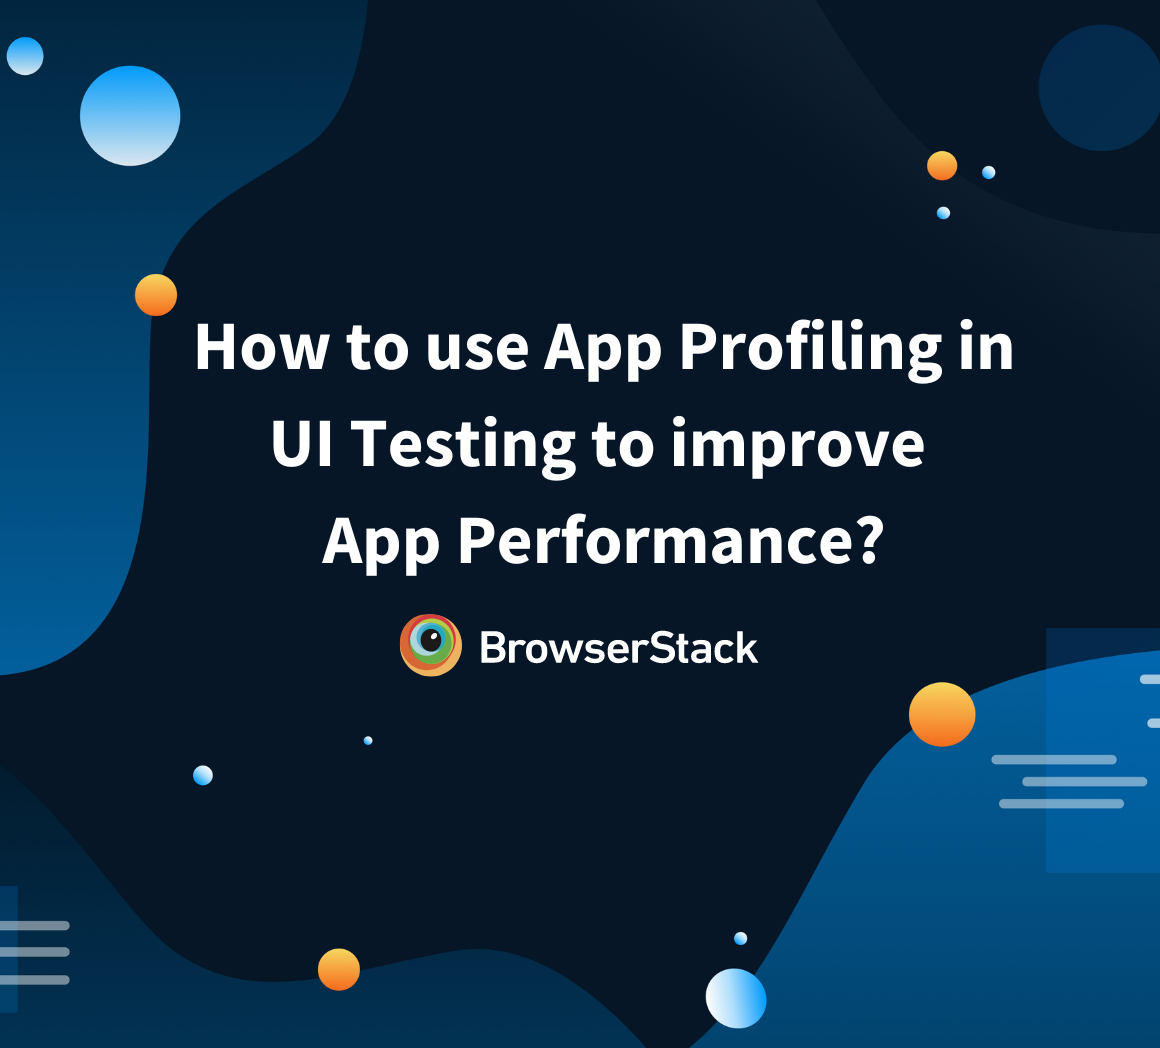 How to use App Profiling in UI Testing to improve App Performance?